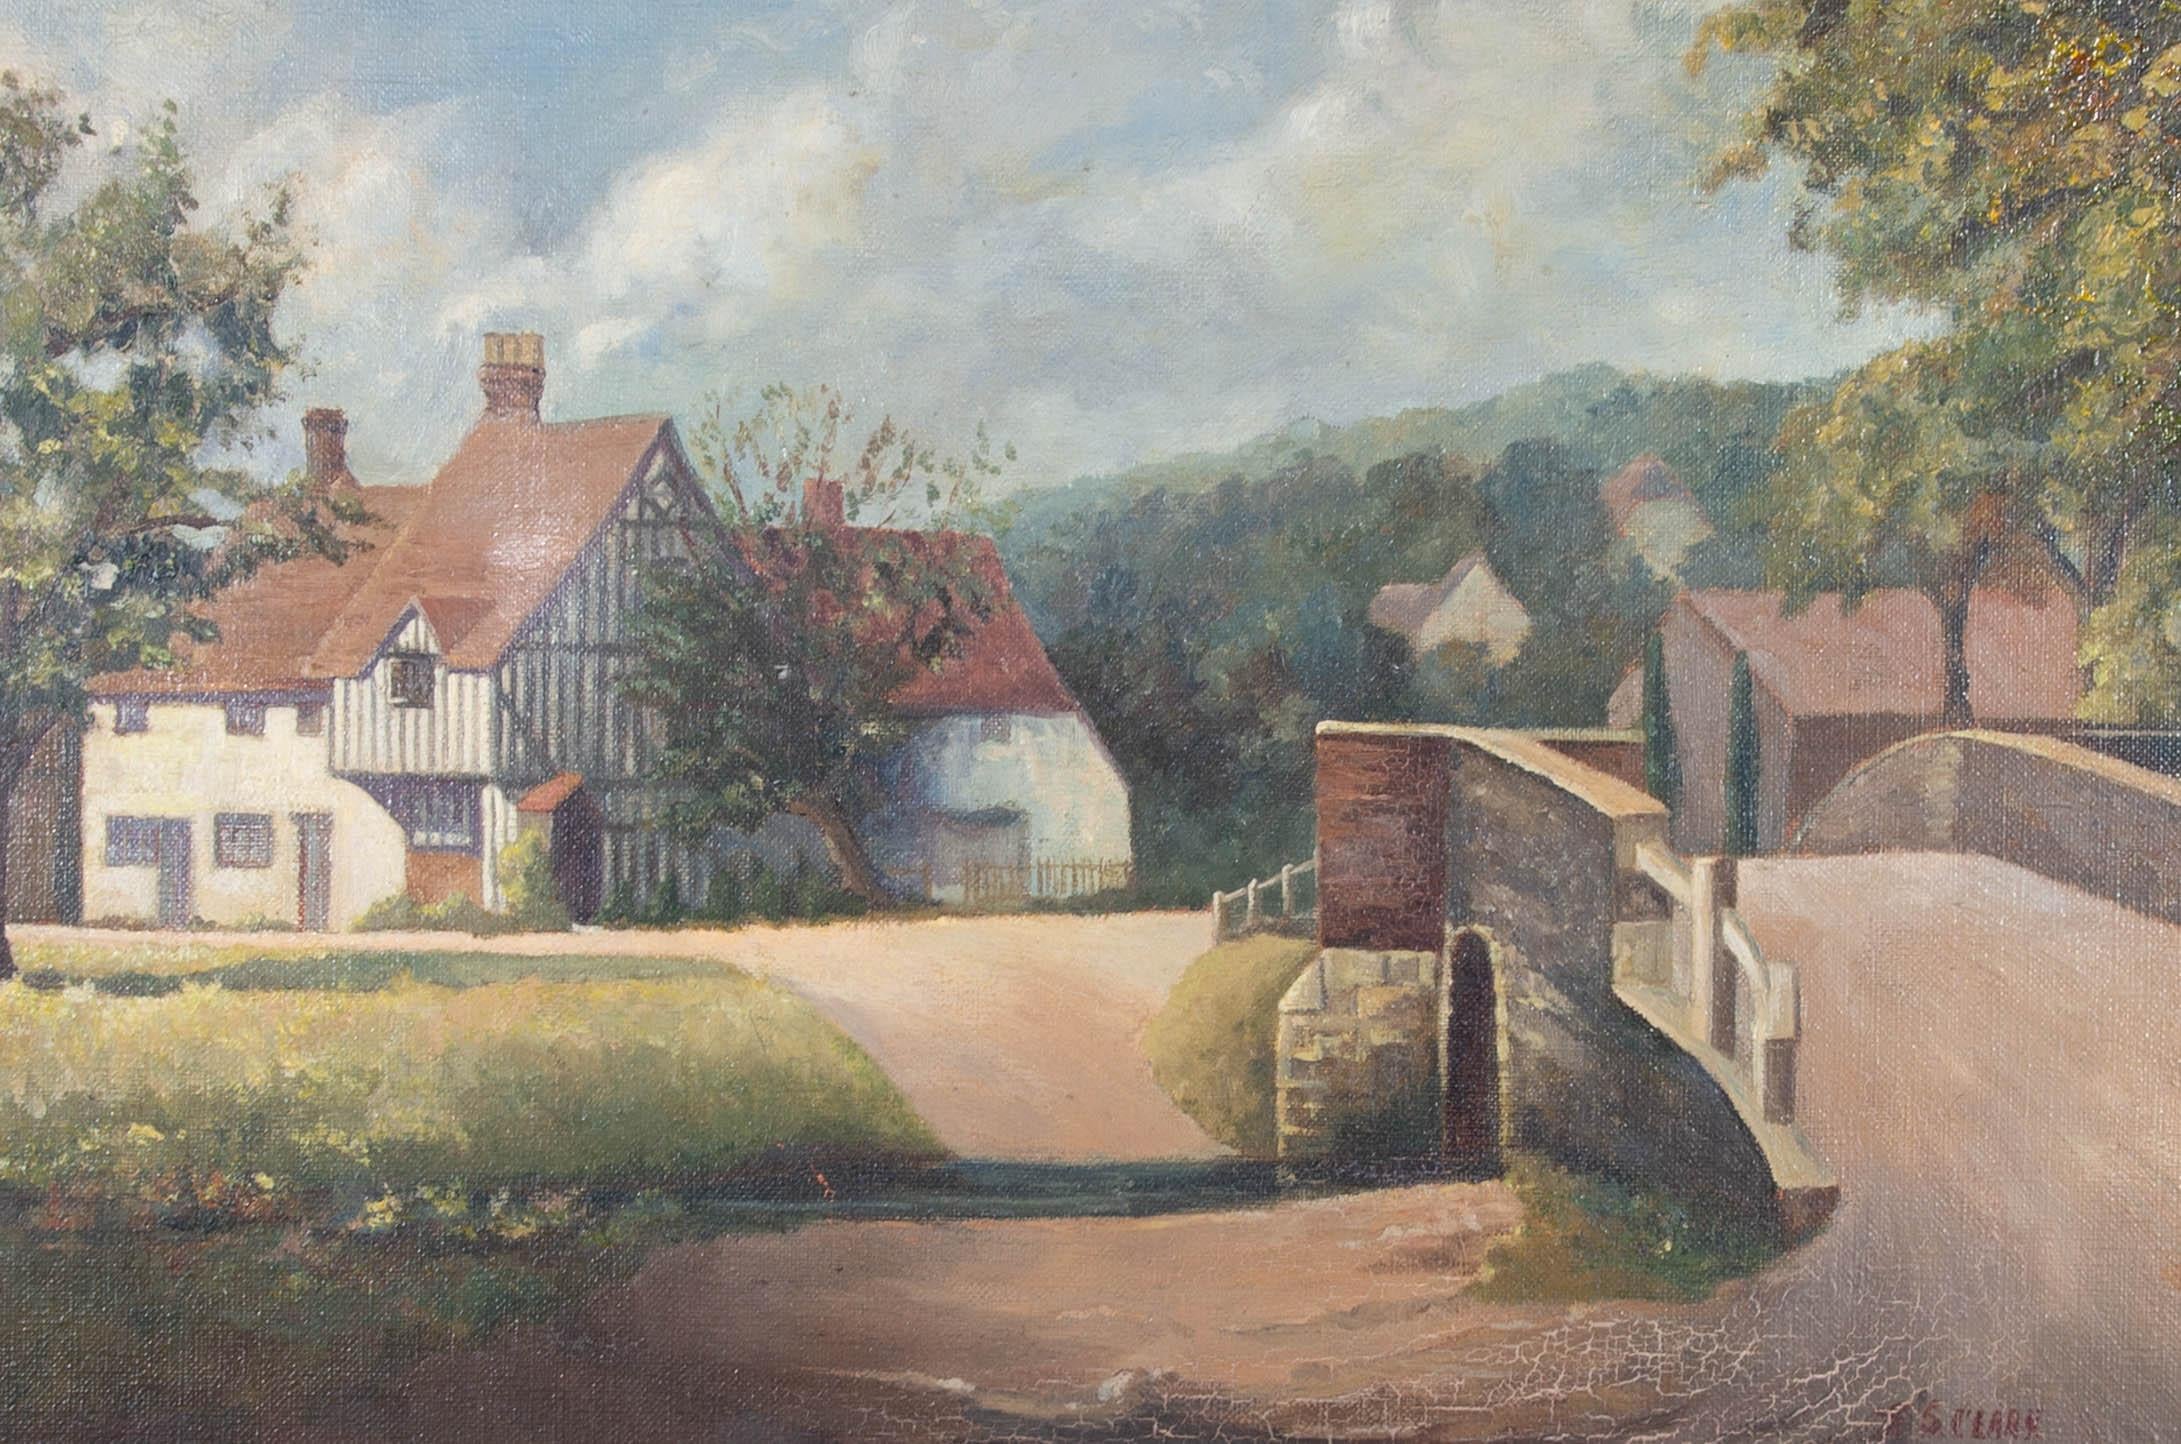 This delightful village scene depicts a Tudor style house on a green with a small bridge to the right. The artist paints in a realist style with bold lines and a matte palette. Signed to the lower right. Presented in a decorative gilt frame. On